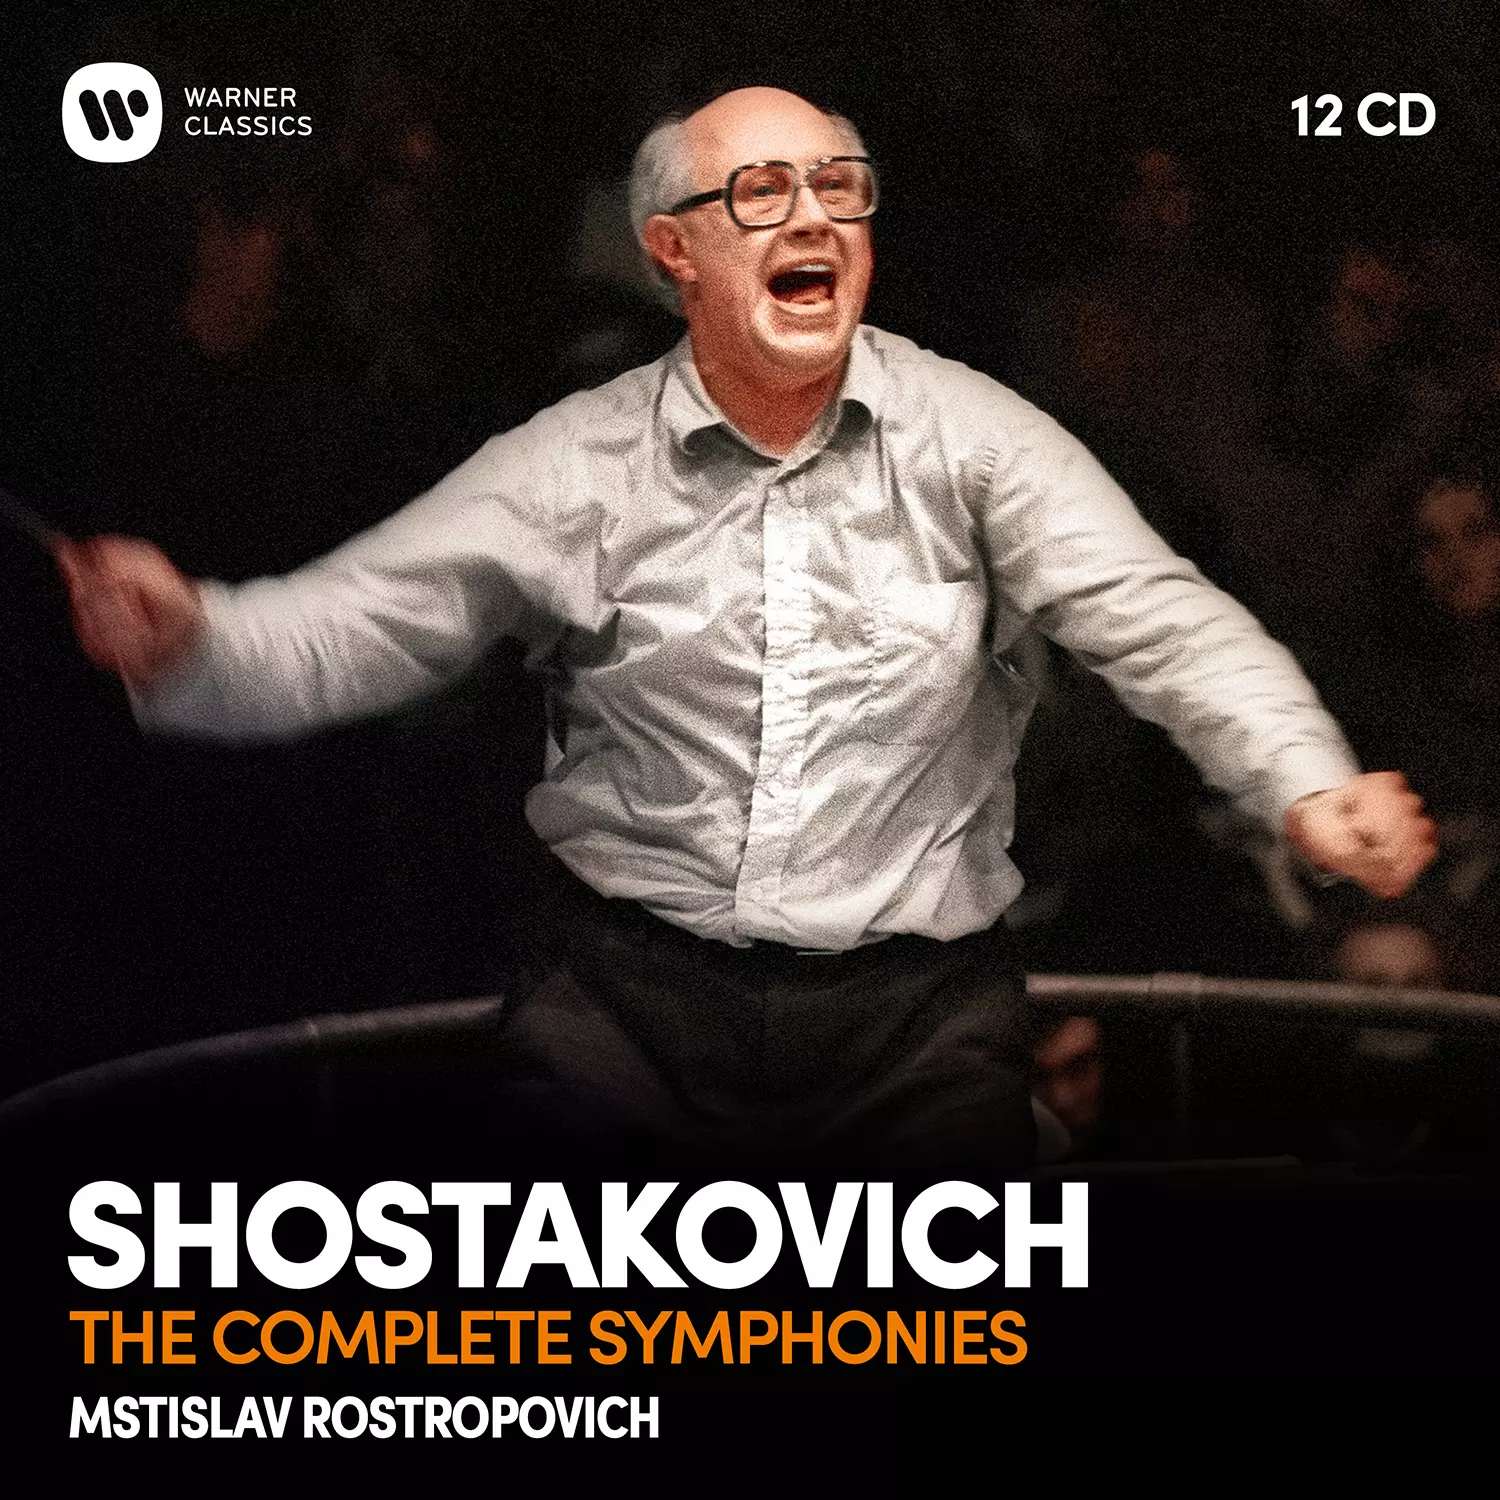 Shostakovich: The Complete Symphonies 